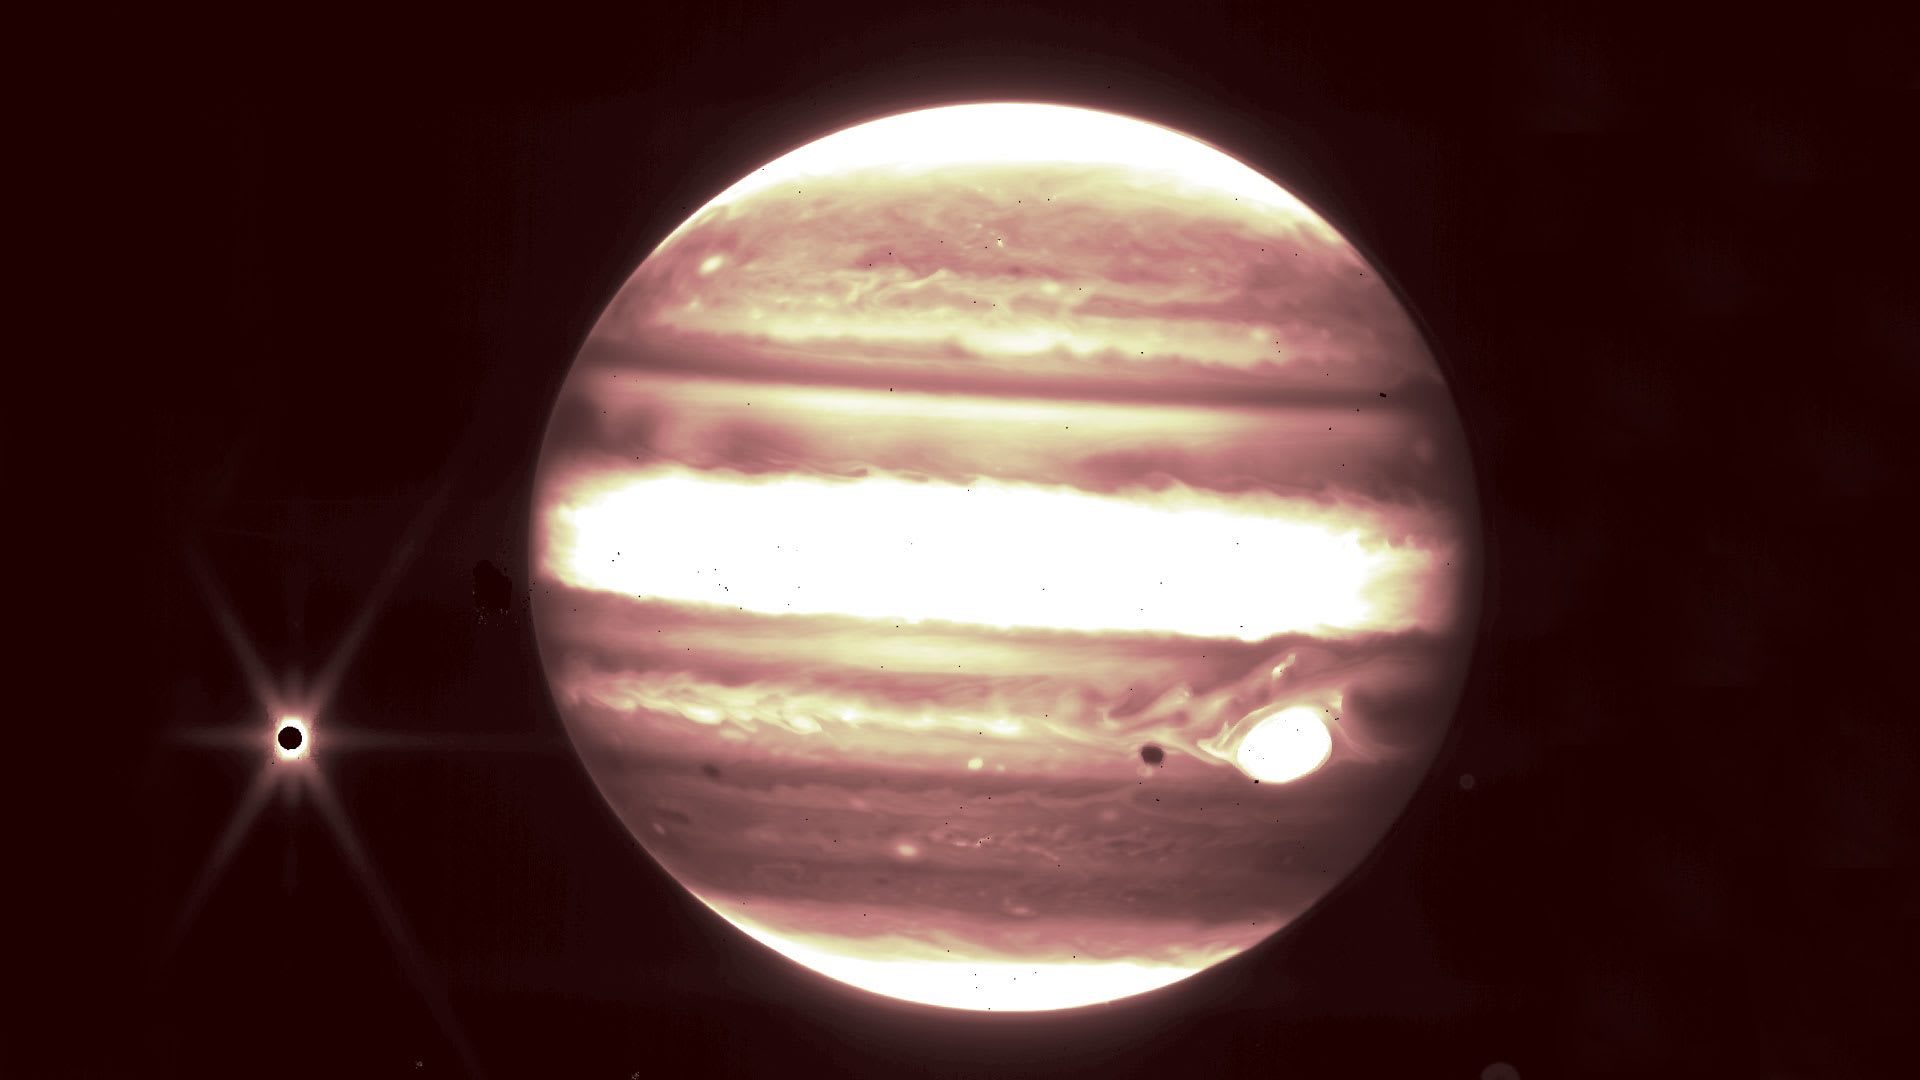 See Jupiter in all its infrared glory through the eyes of NASA’s James Webb Space Telescope